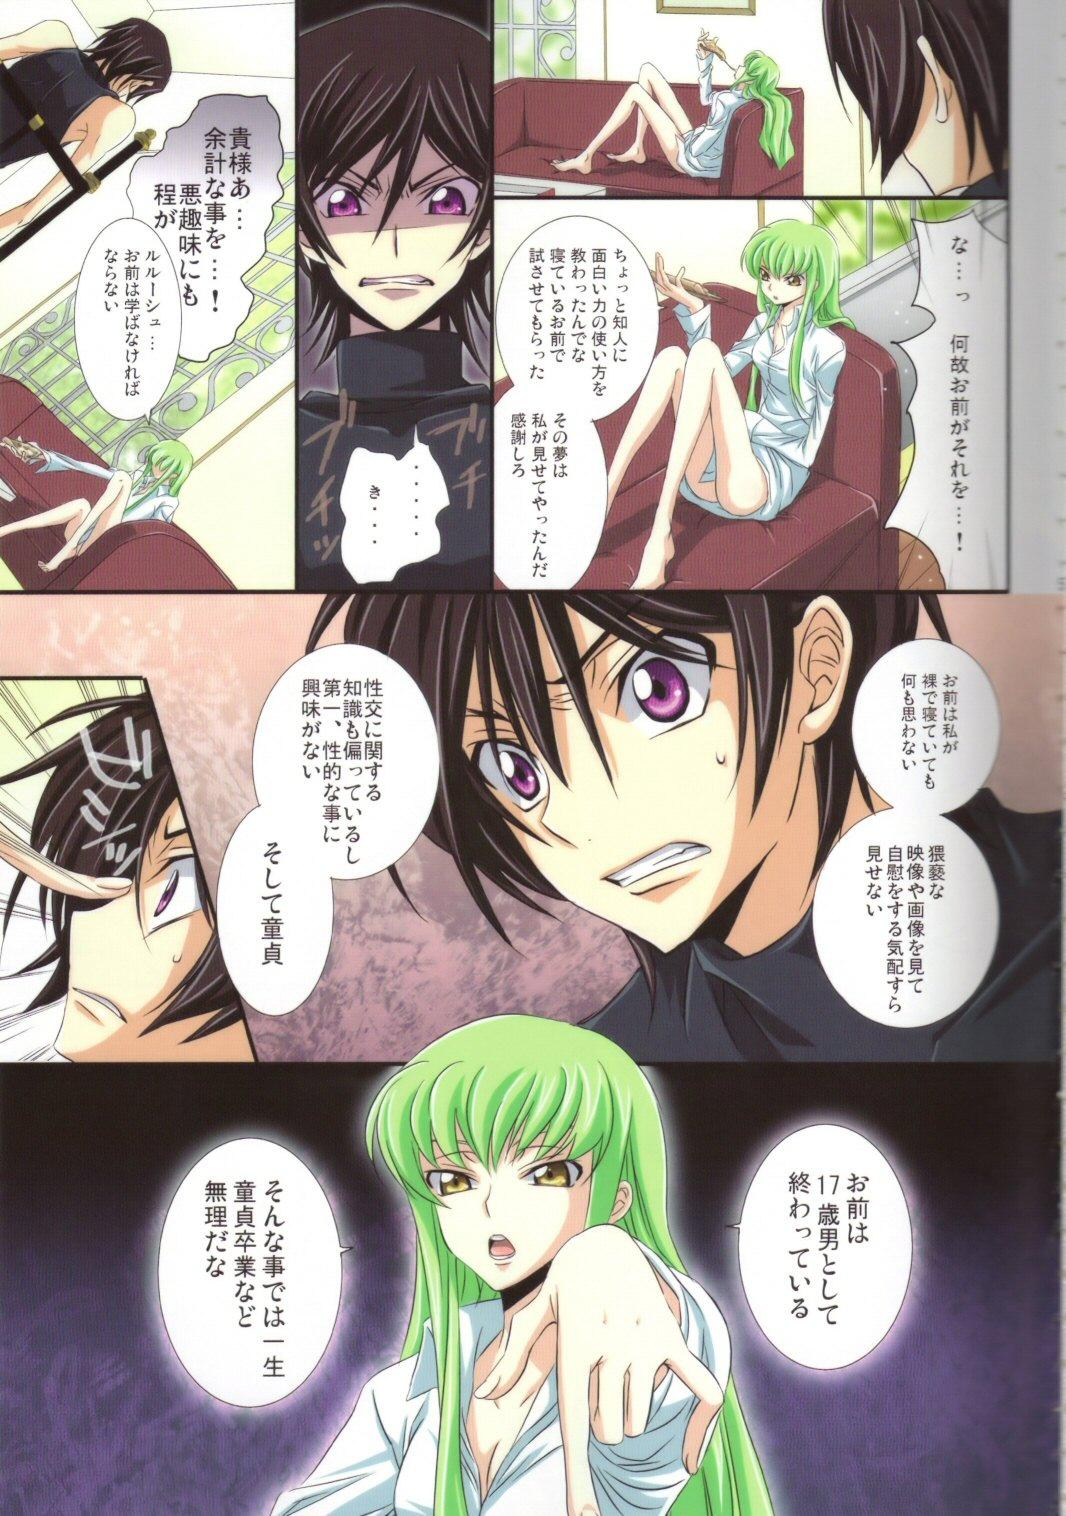 Orgy on・non・om - Code geass Pussyeating - Page 4